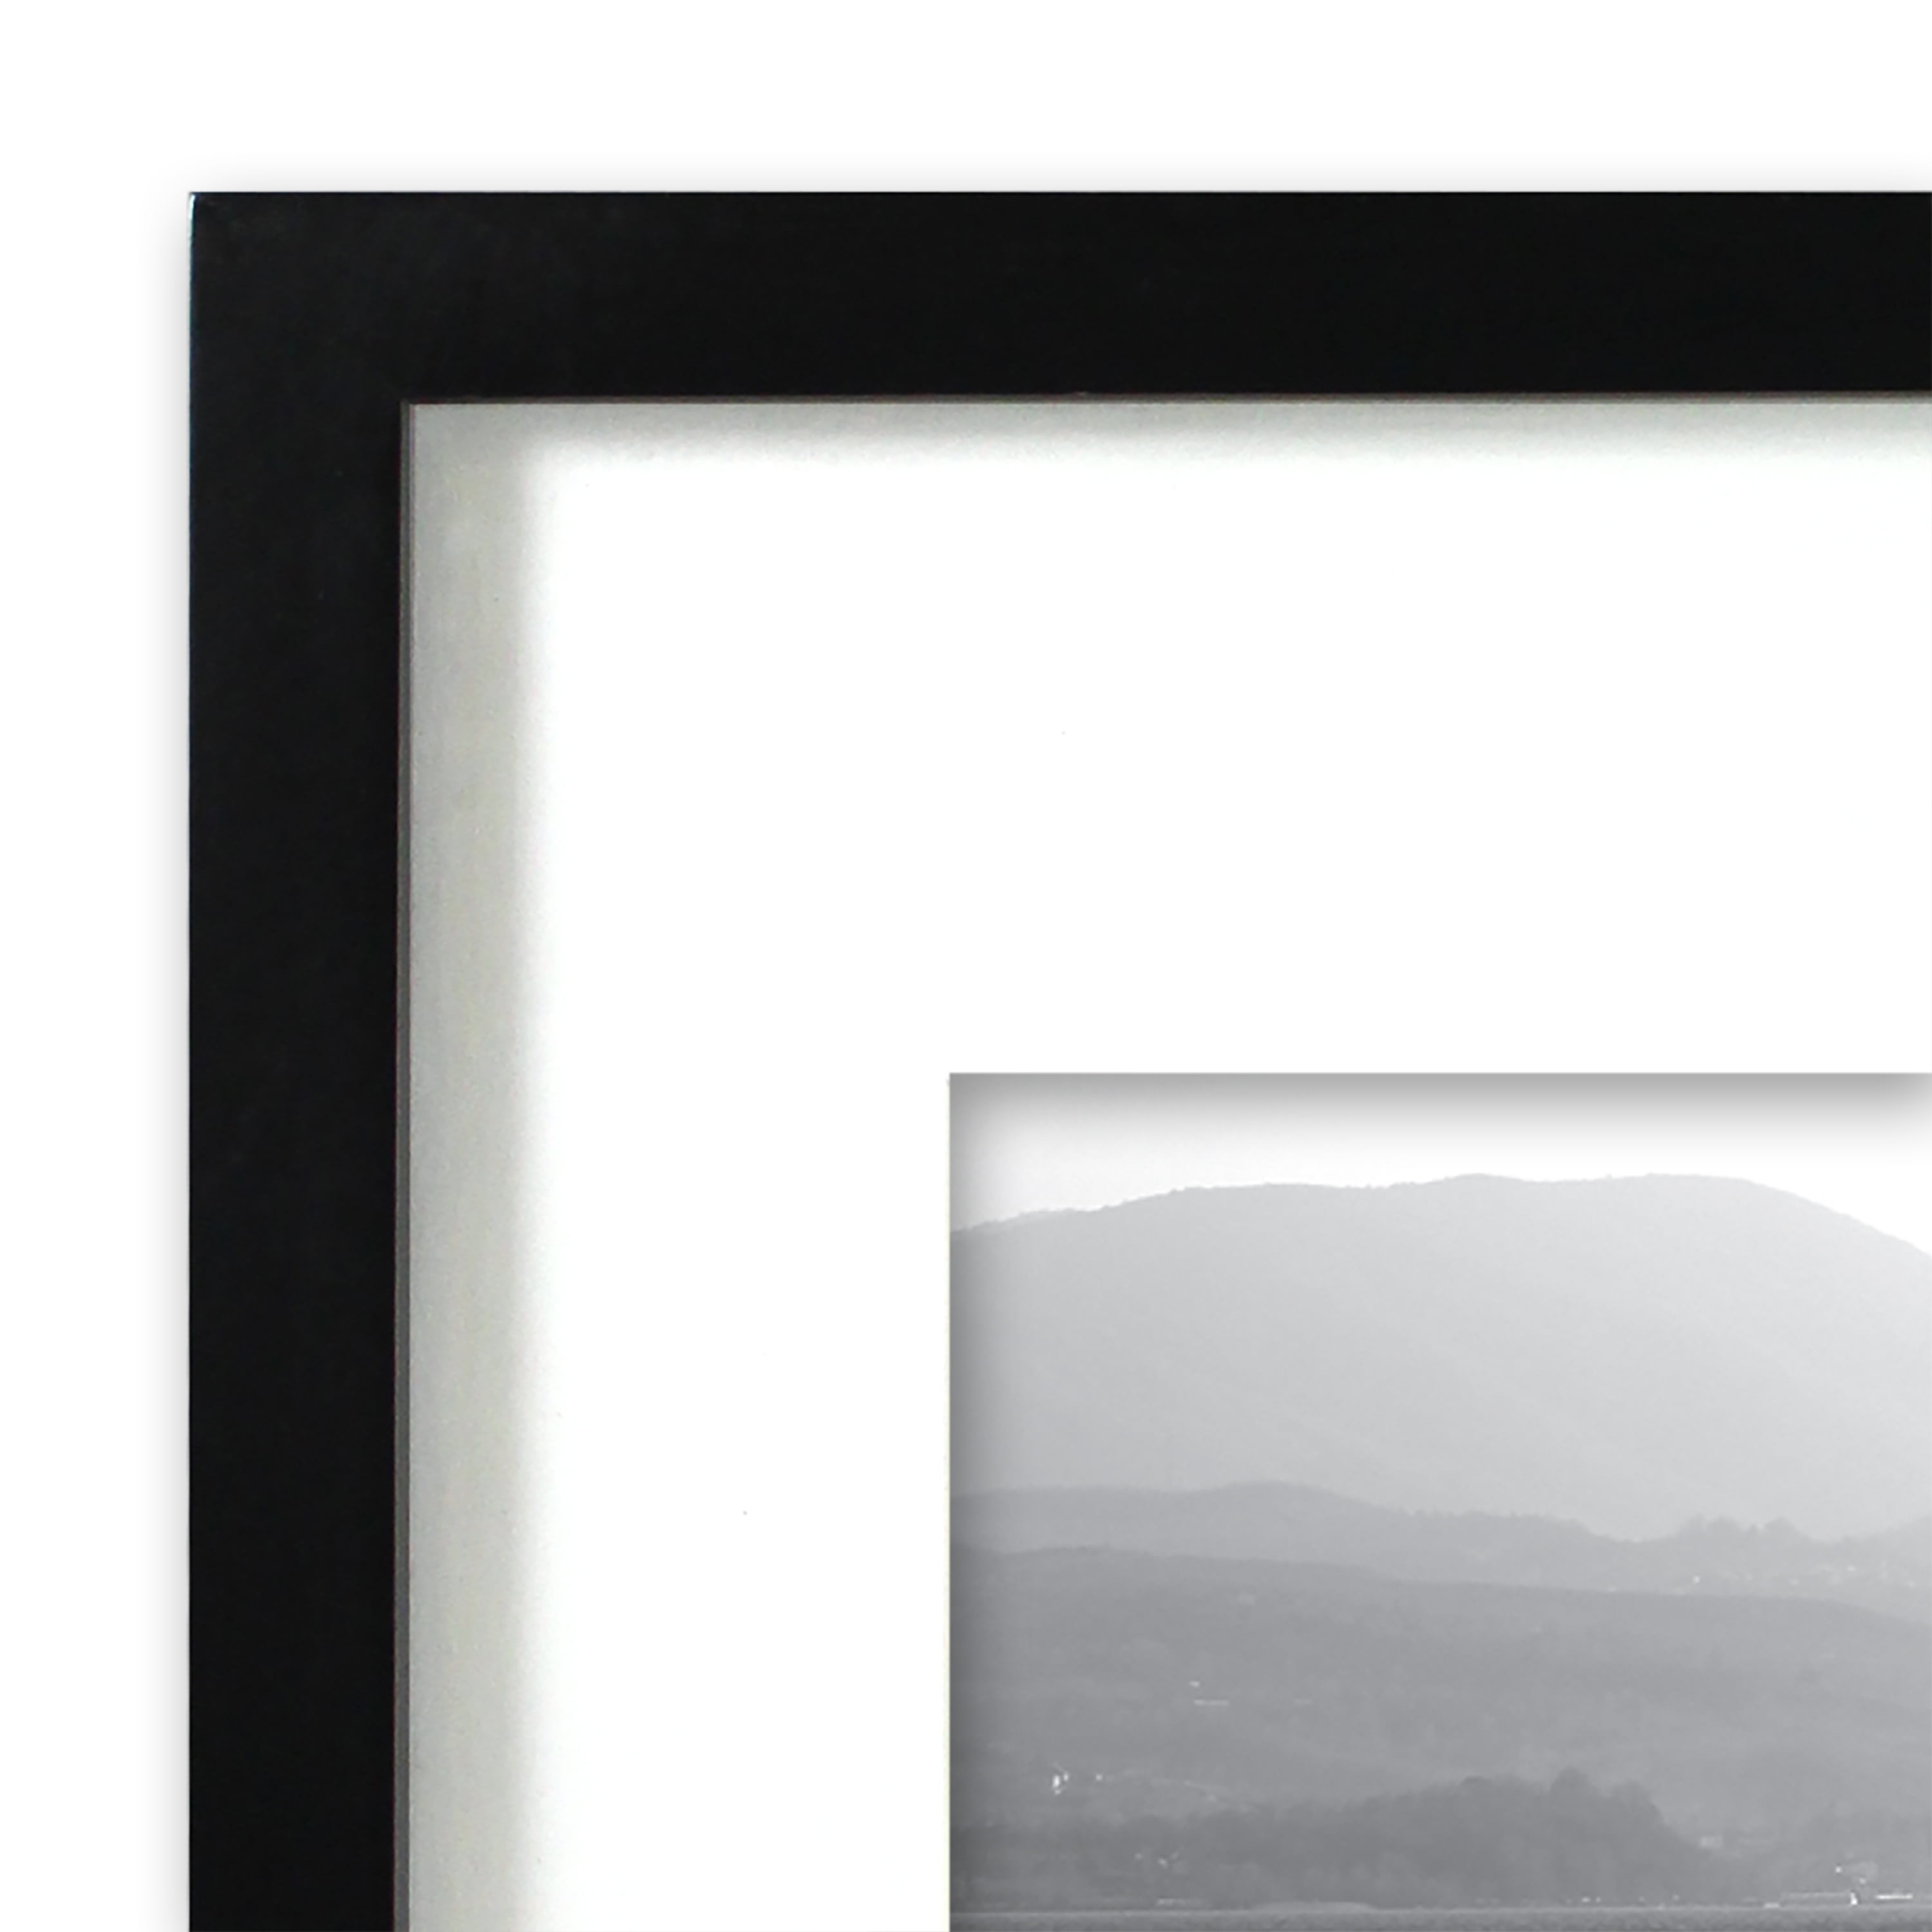 Case of 6 Mainstays 11x14 Matted to 8x10 Front Loading Picture Frame Black  - Matthews Auctioneers